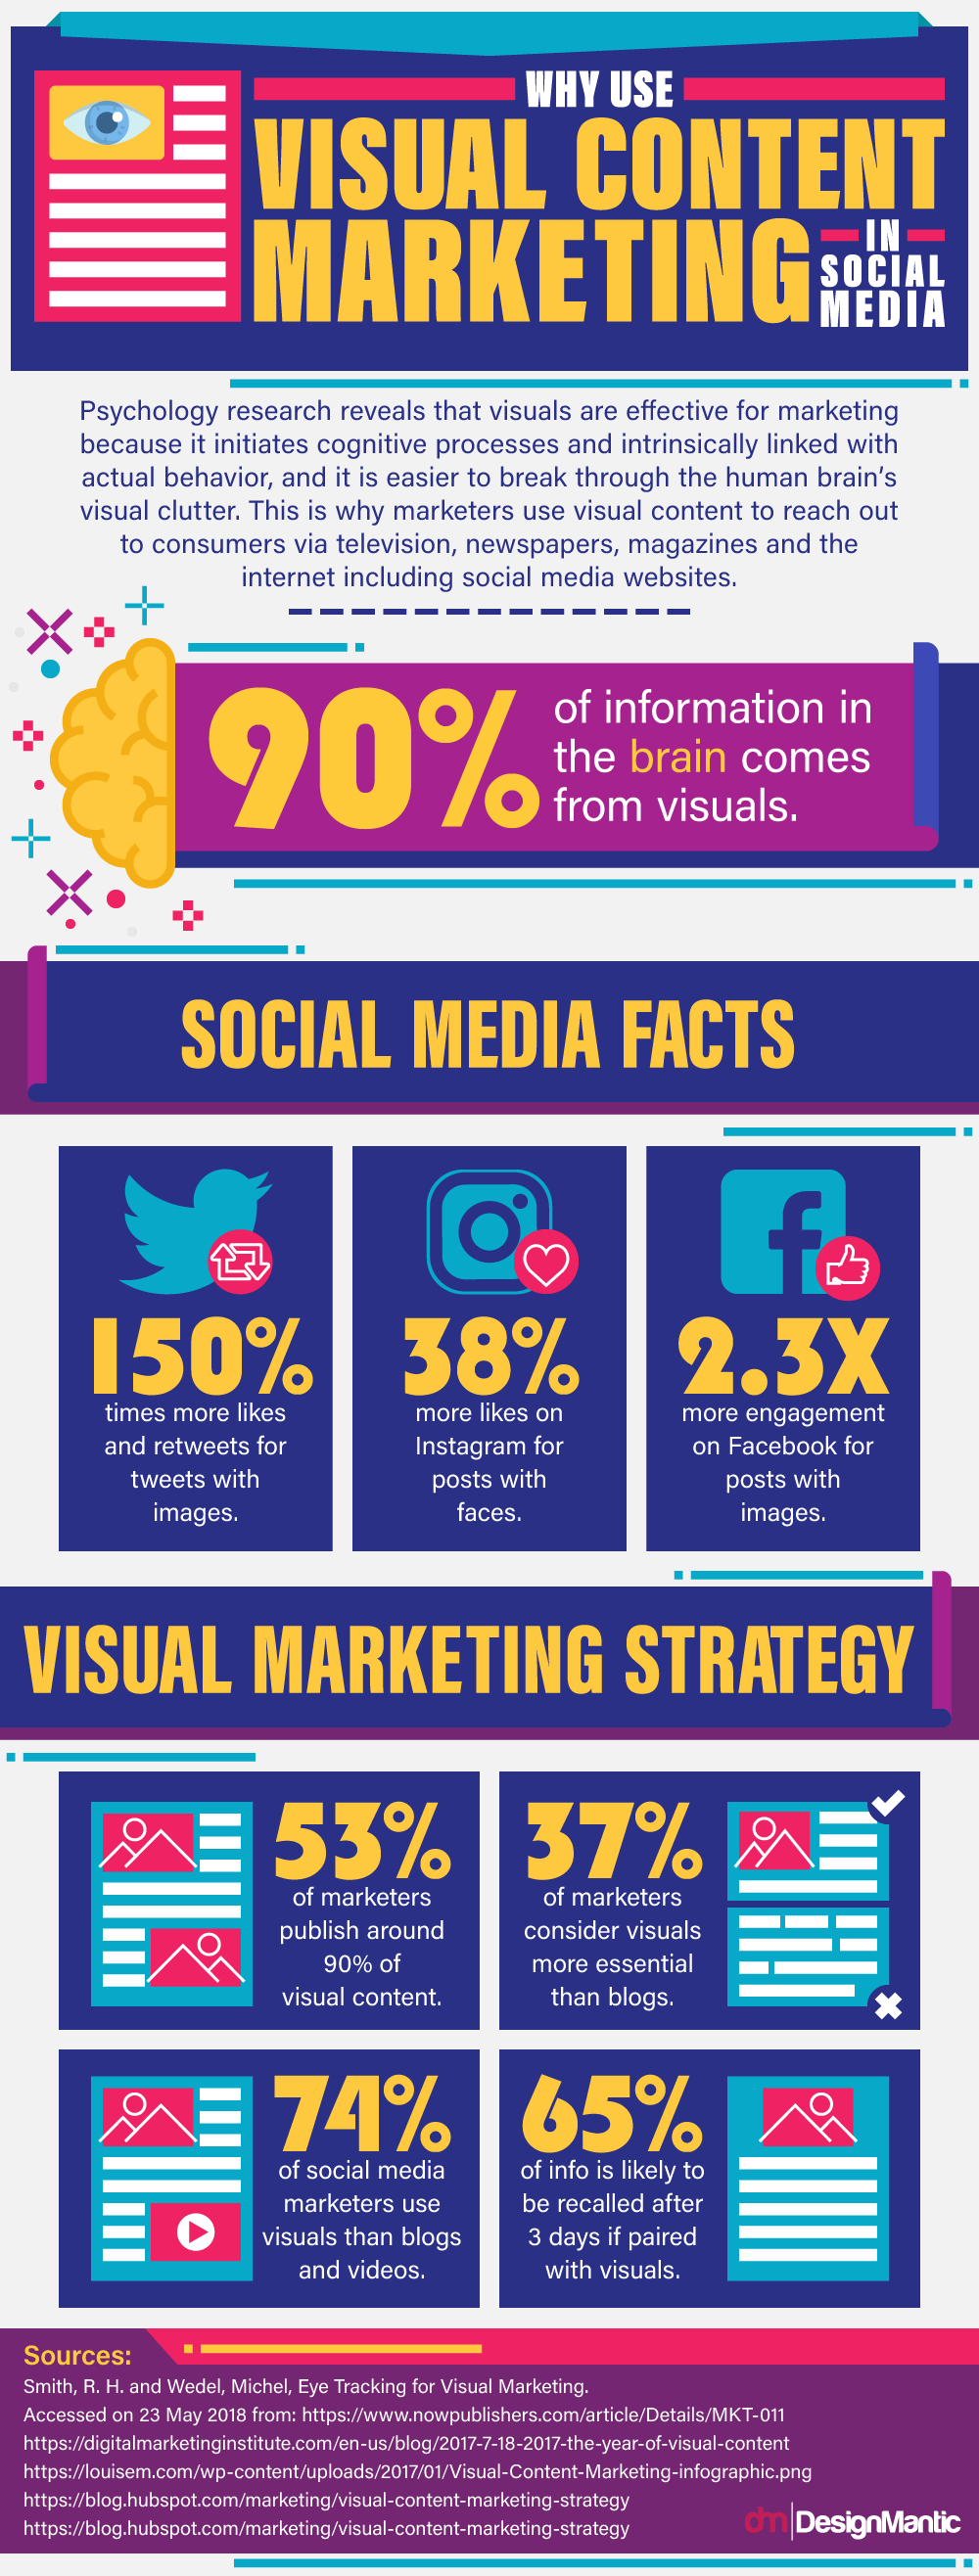 Infographic on Why use visual content in marketing